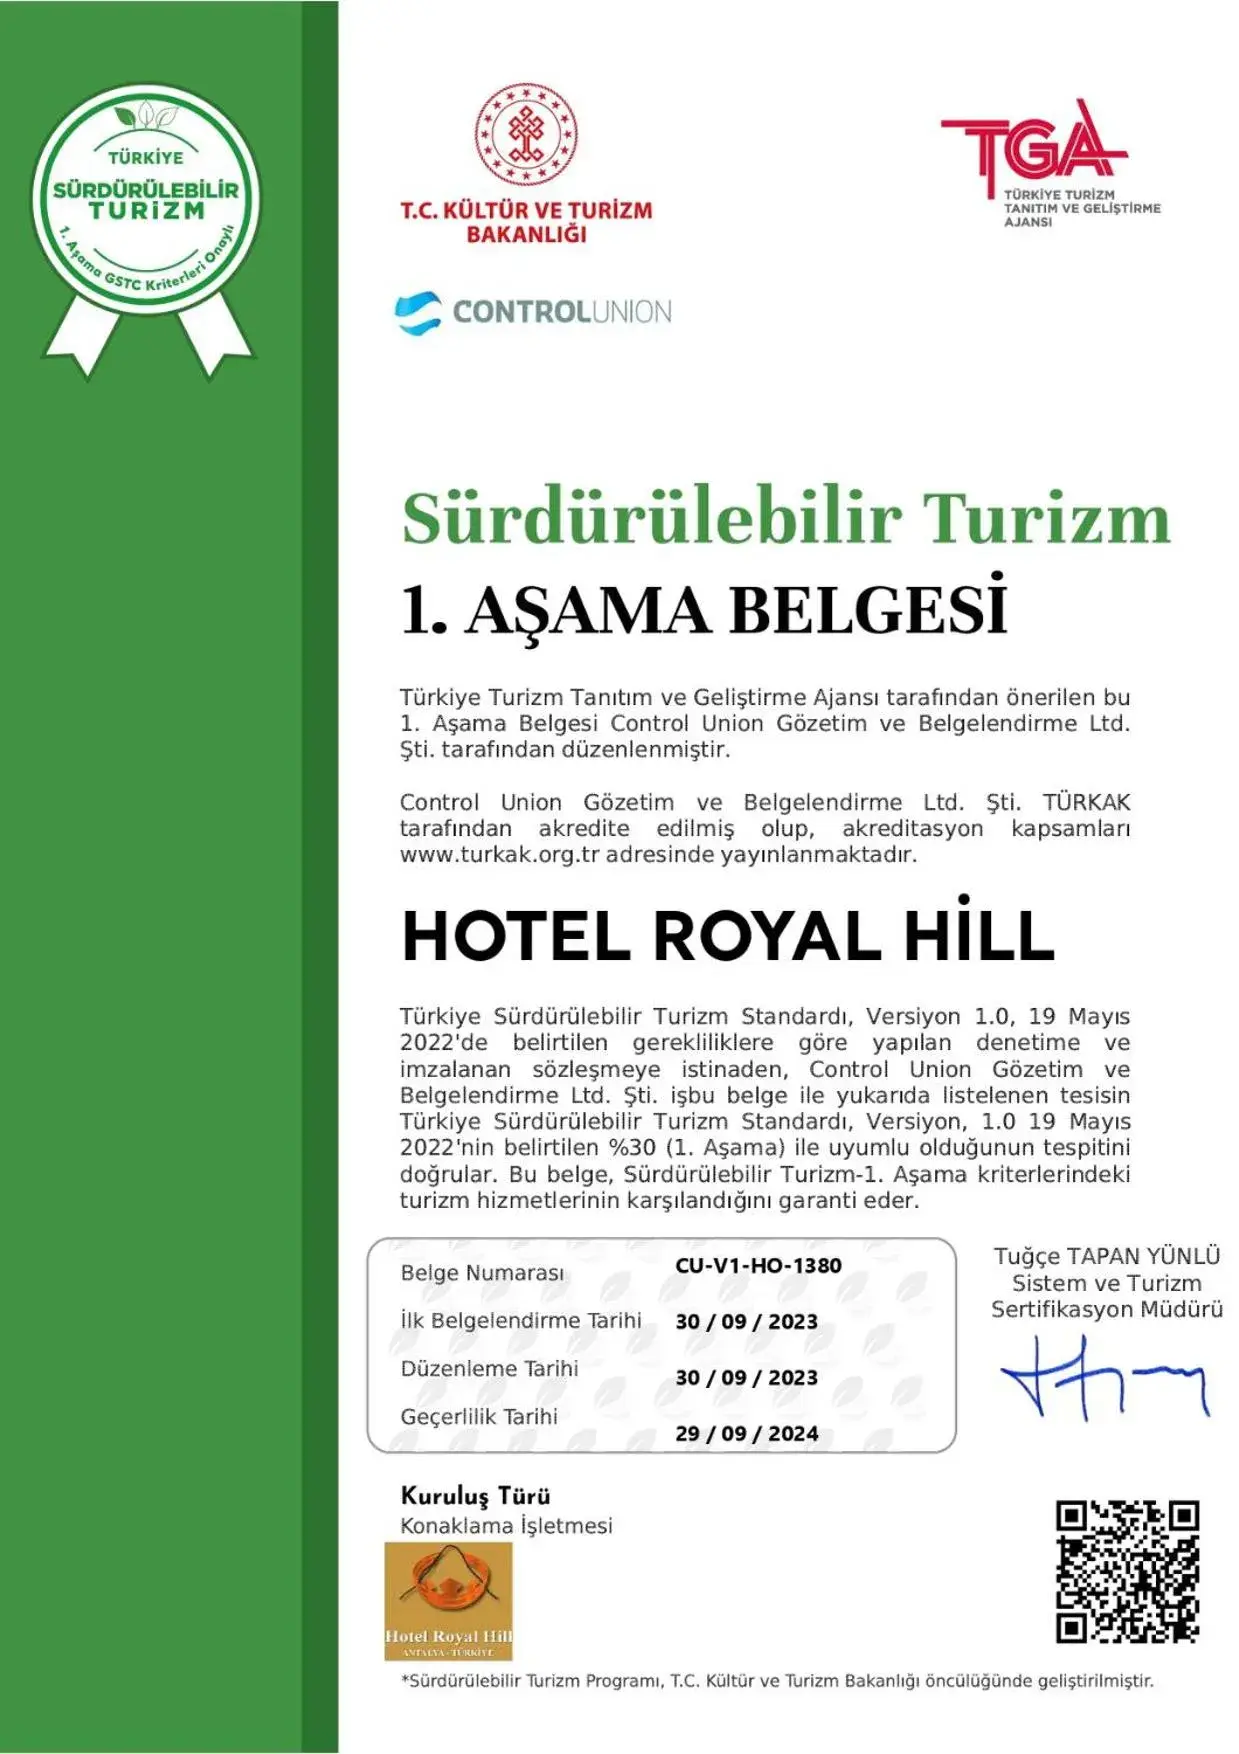 Logo/Certificate/Sign/Award in Hotel Royal Hill